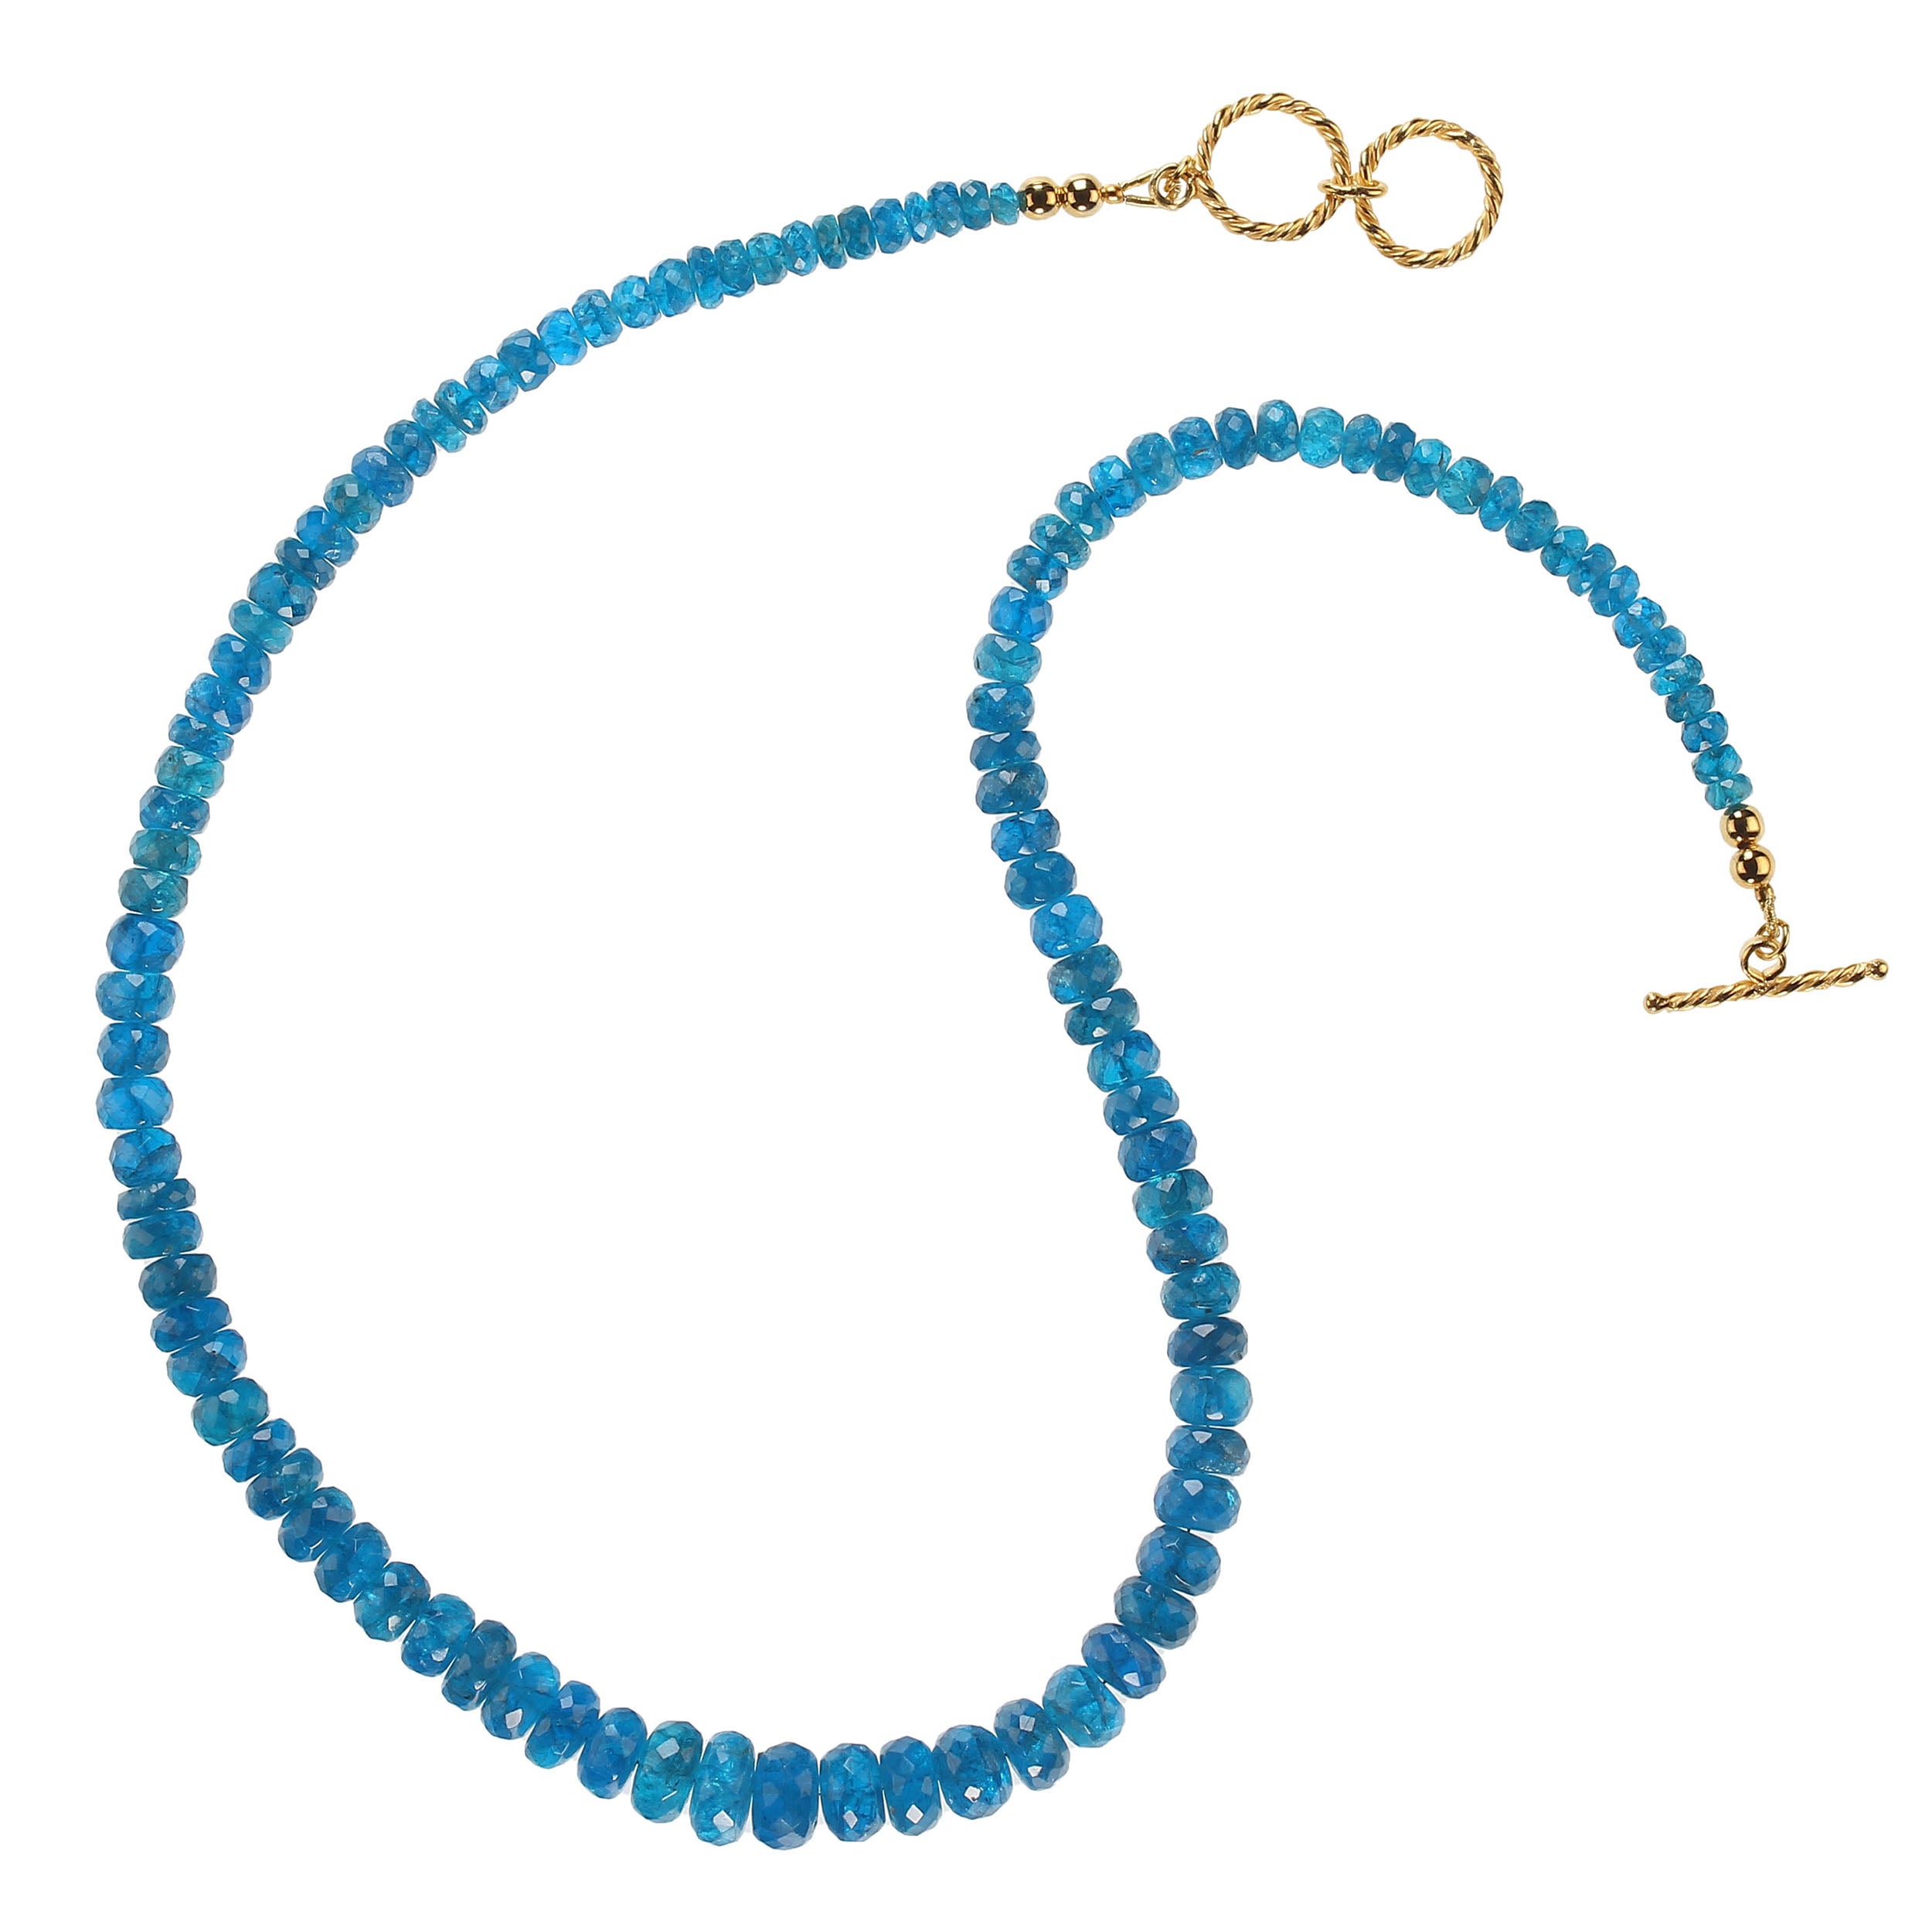 Artisan AJD 19 Inch Gorgeous Graduated Rondelles of Neon Apatite Necklace For Sale